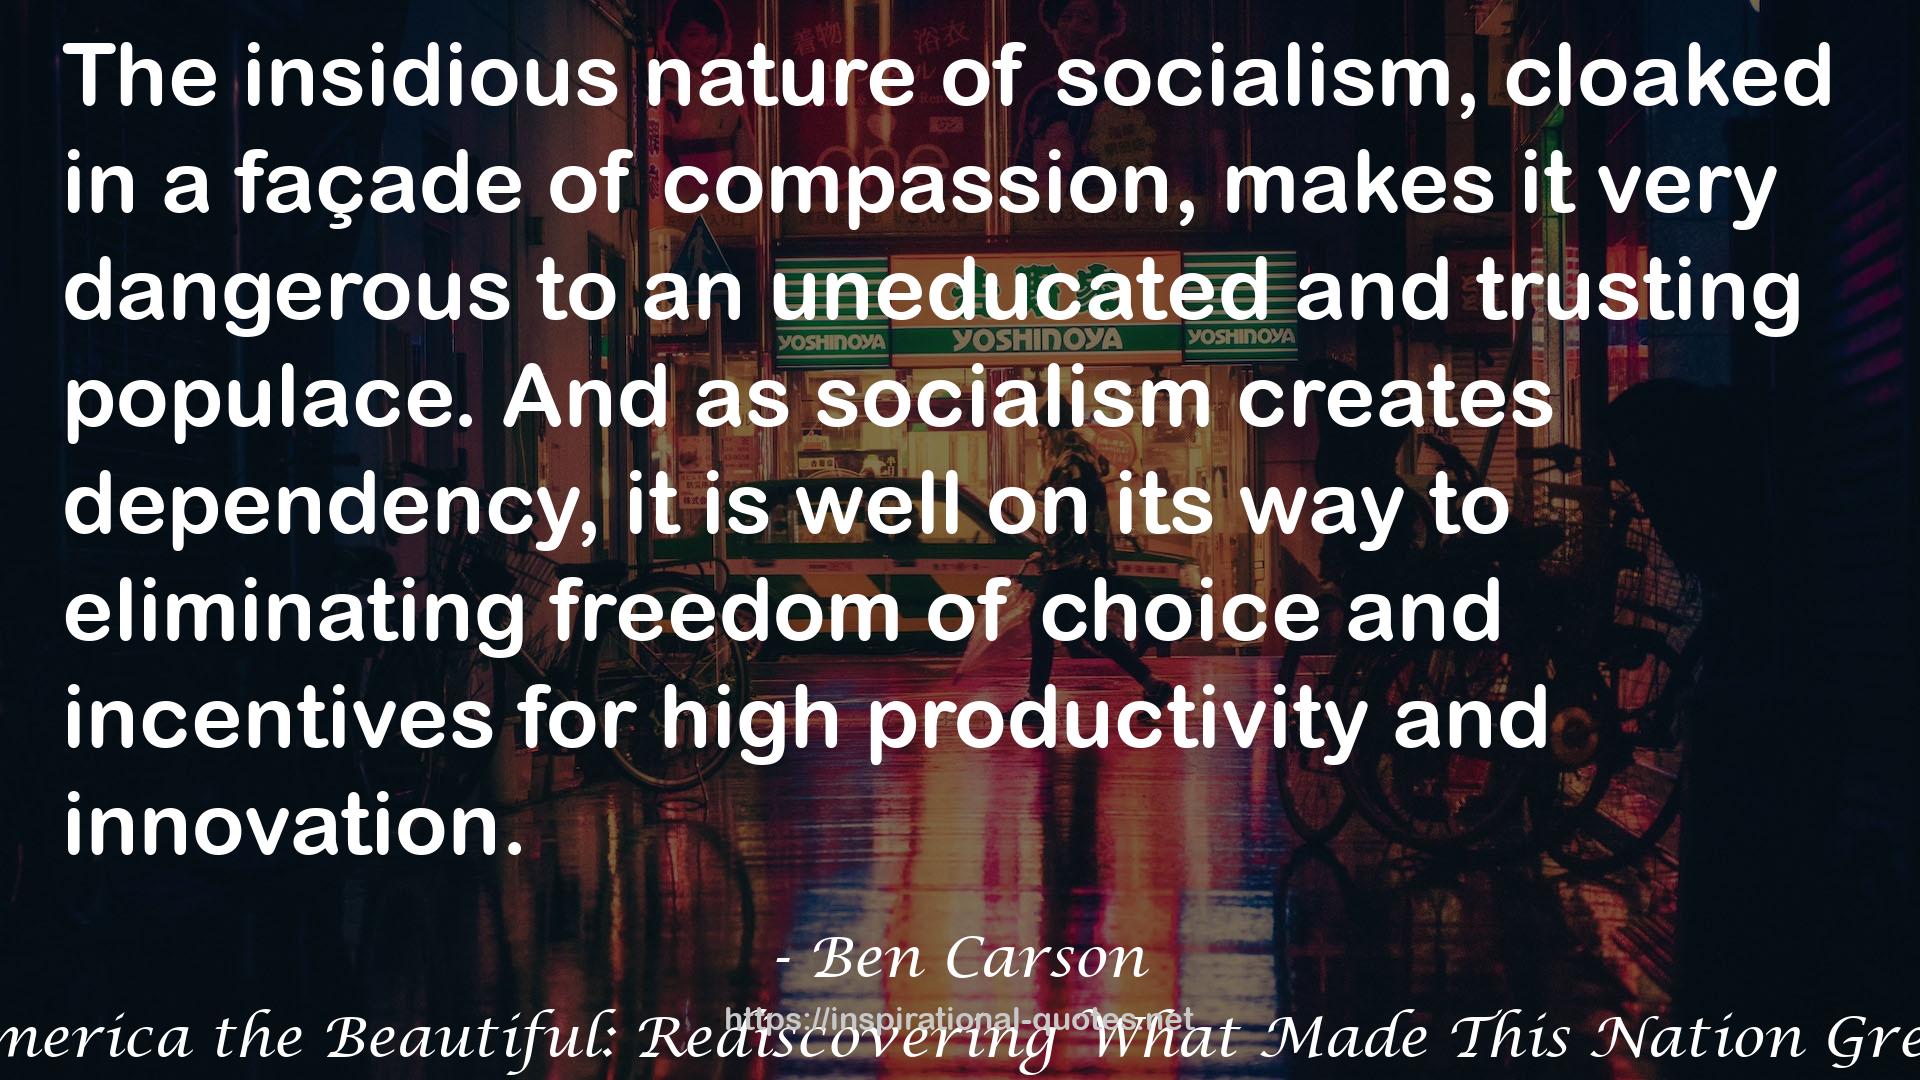 America the Beautiful: Rediscovering What Made This Nation Great QUOTES